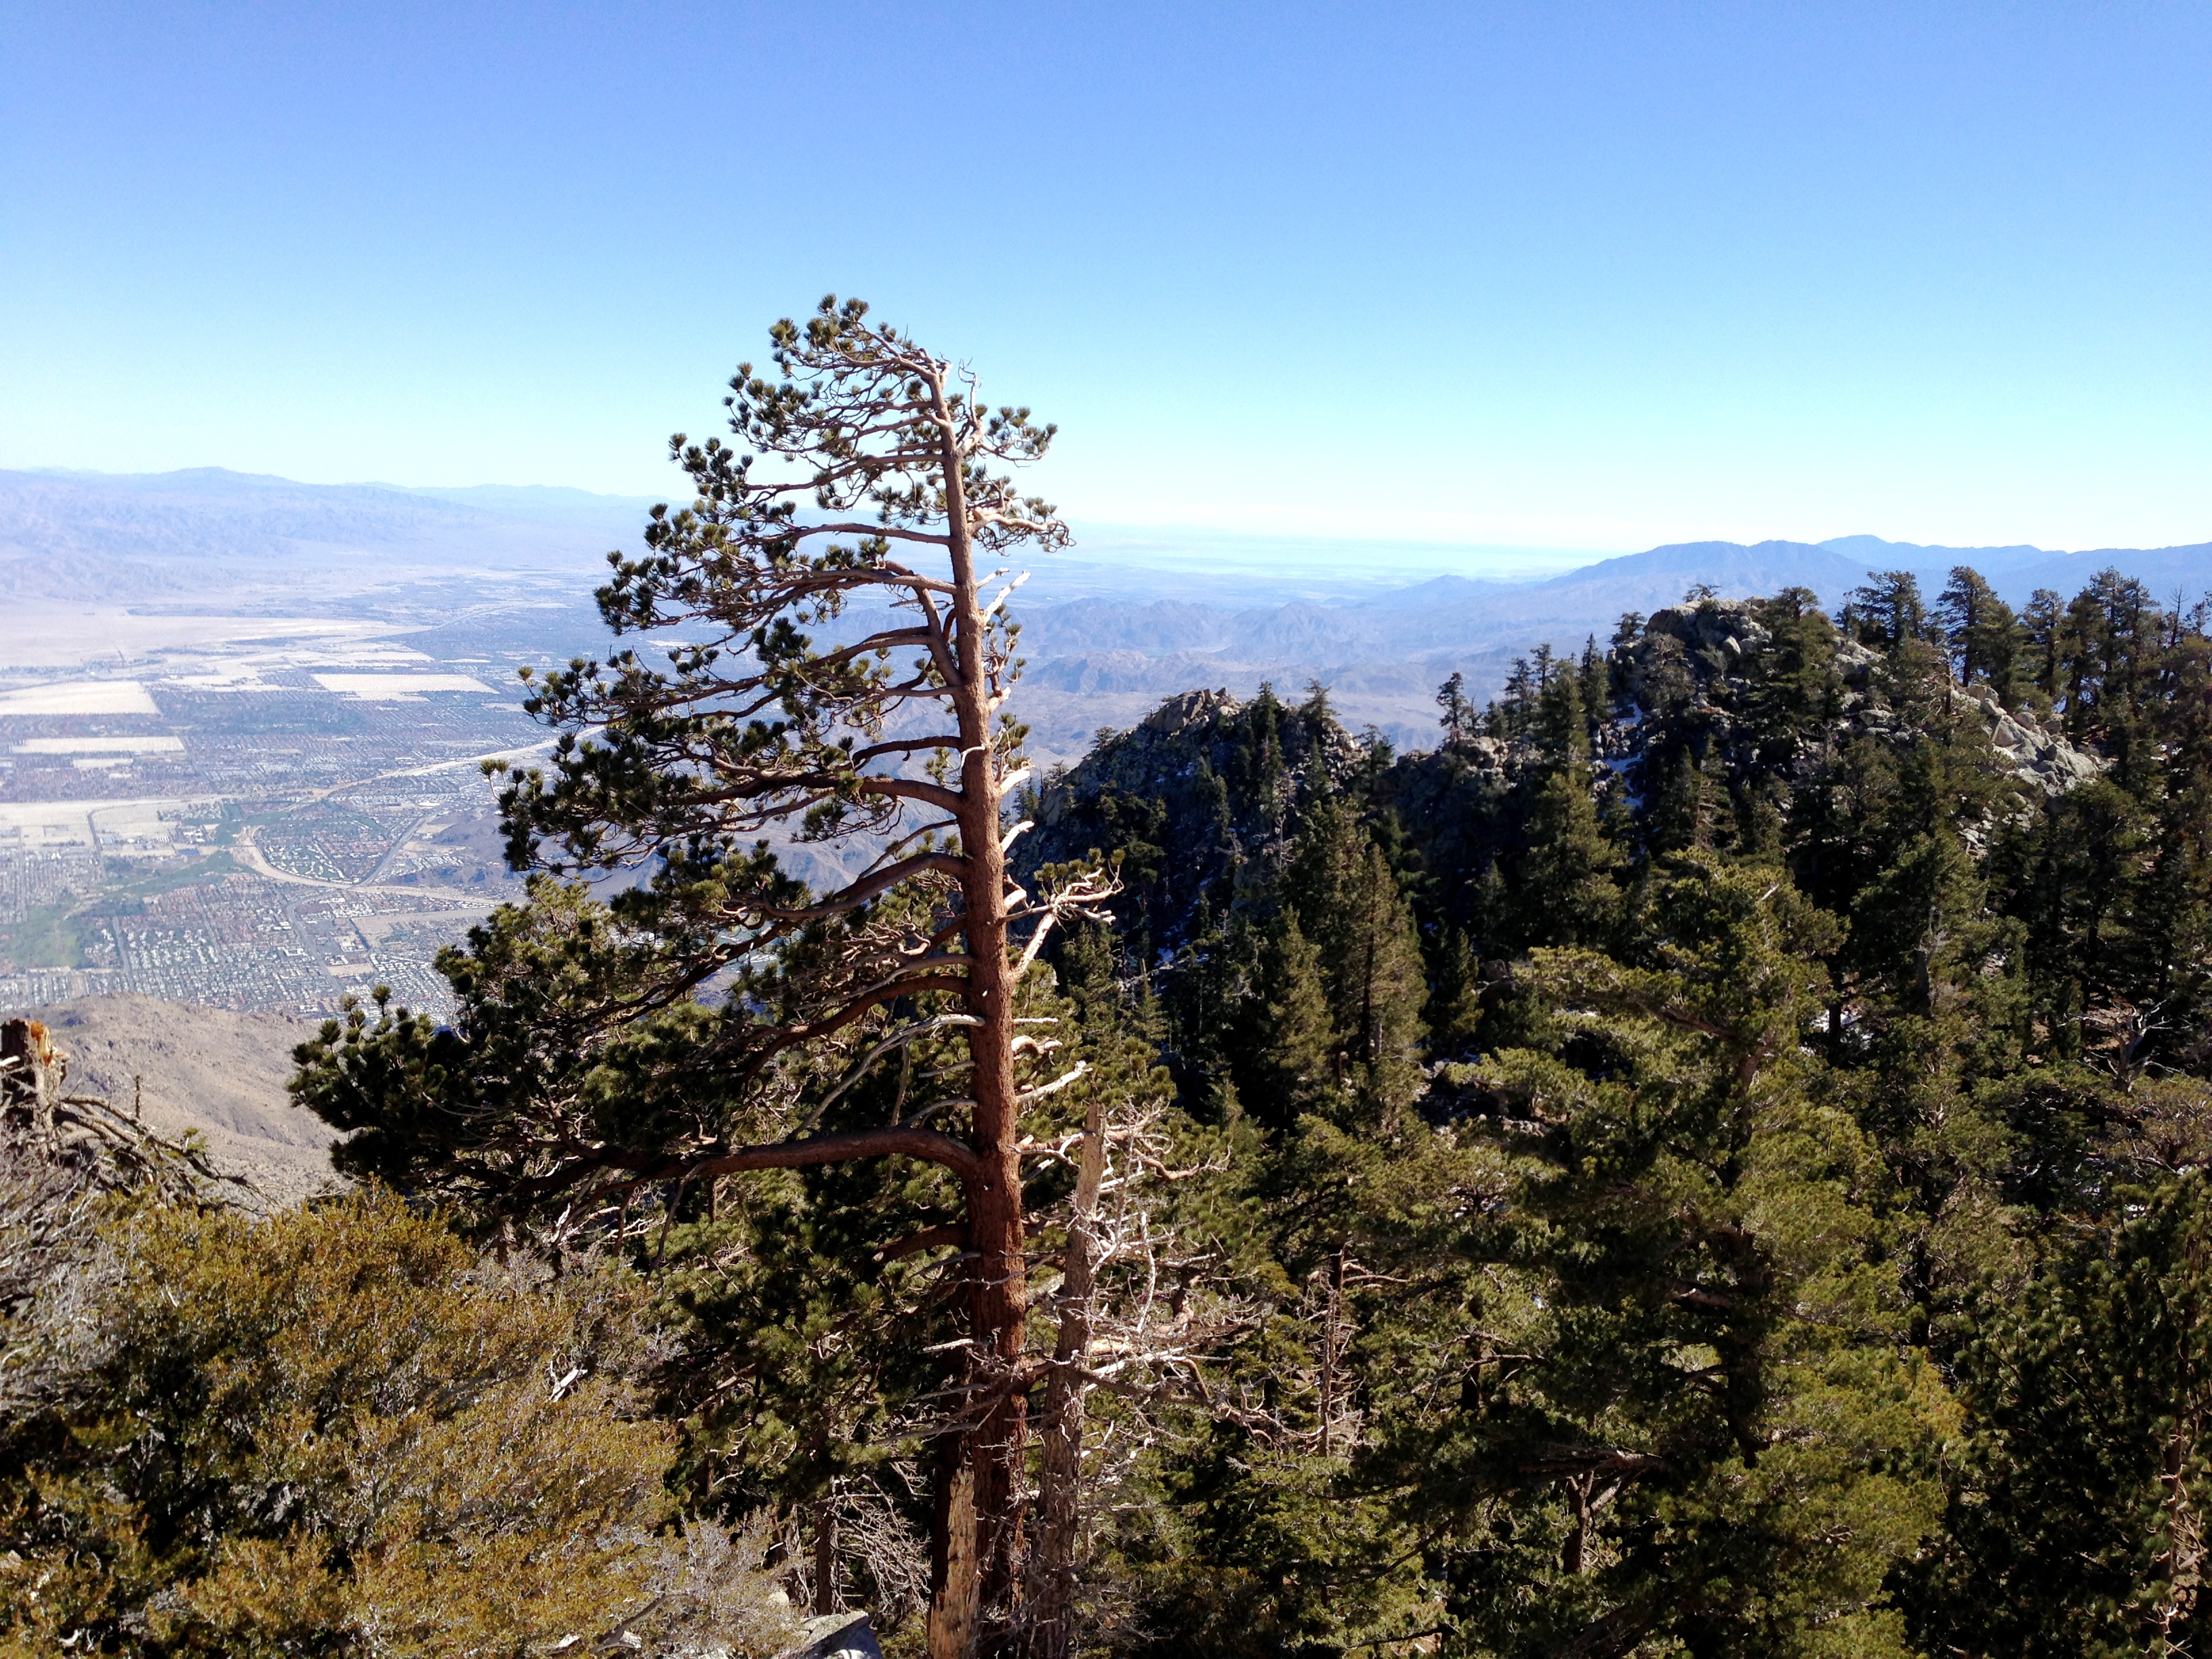 A Journey to the top of Mt. San Jacinto